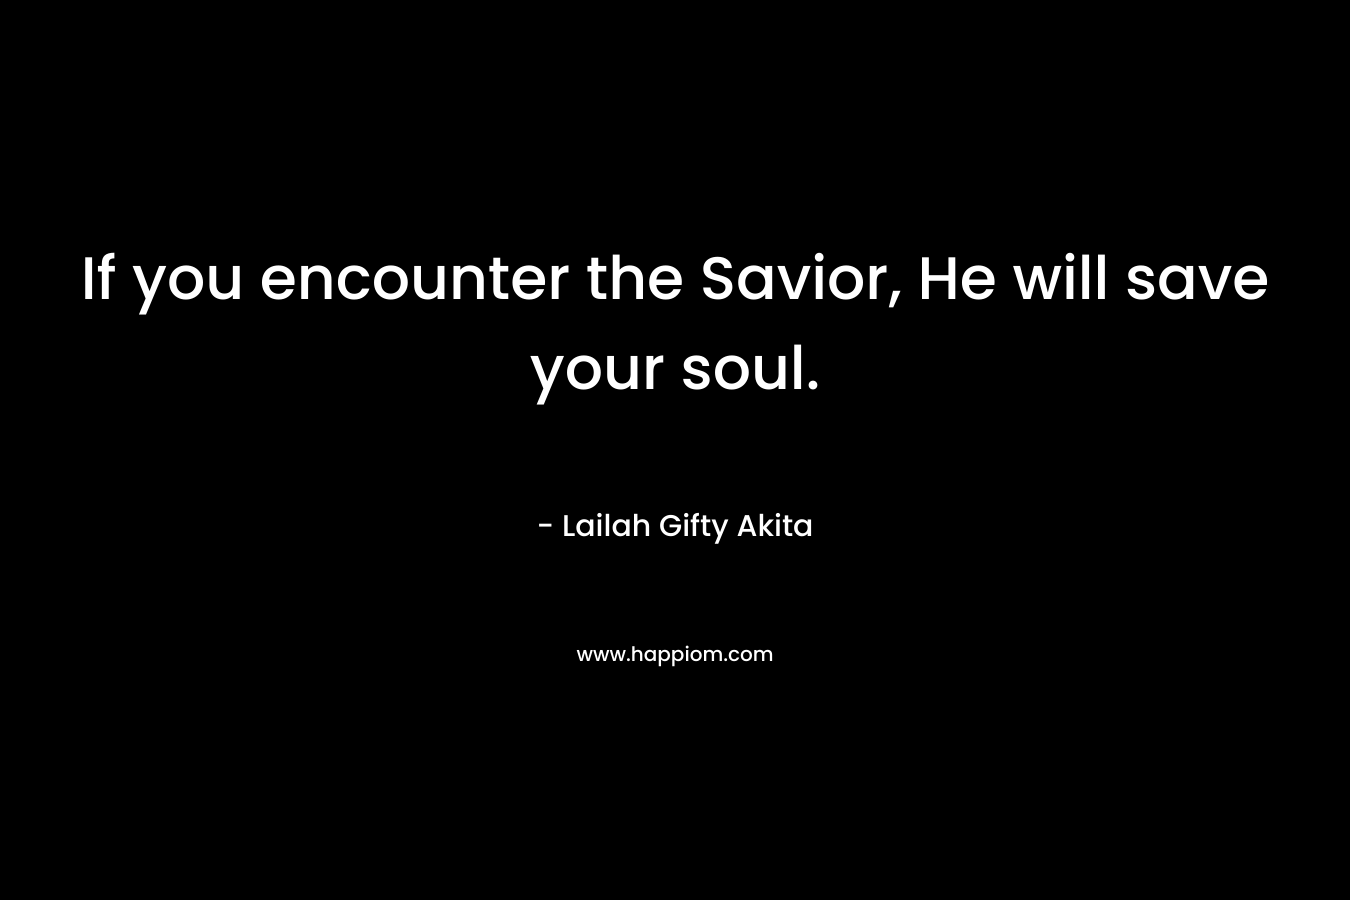 If you encounter the Savior, He will save your soul.